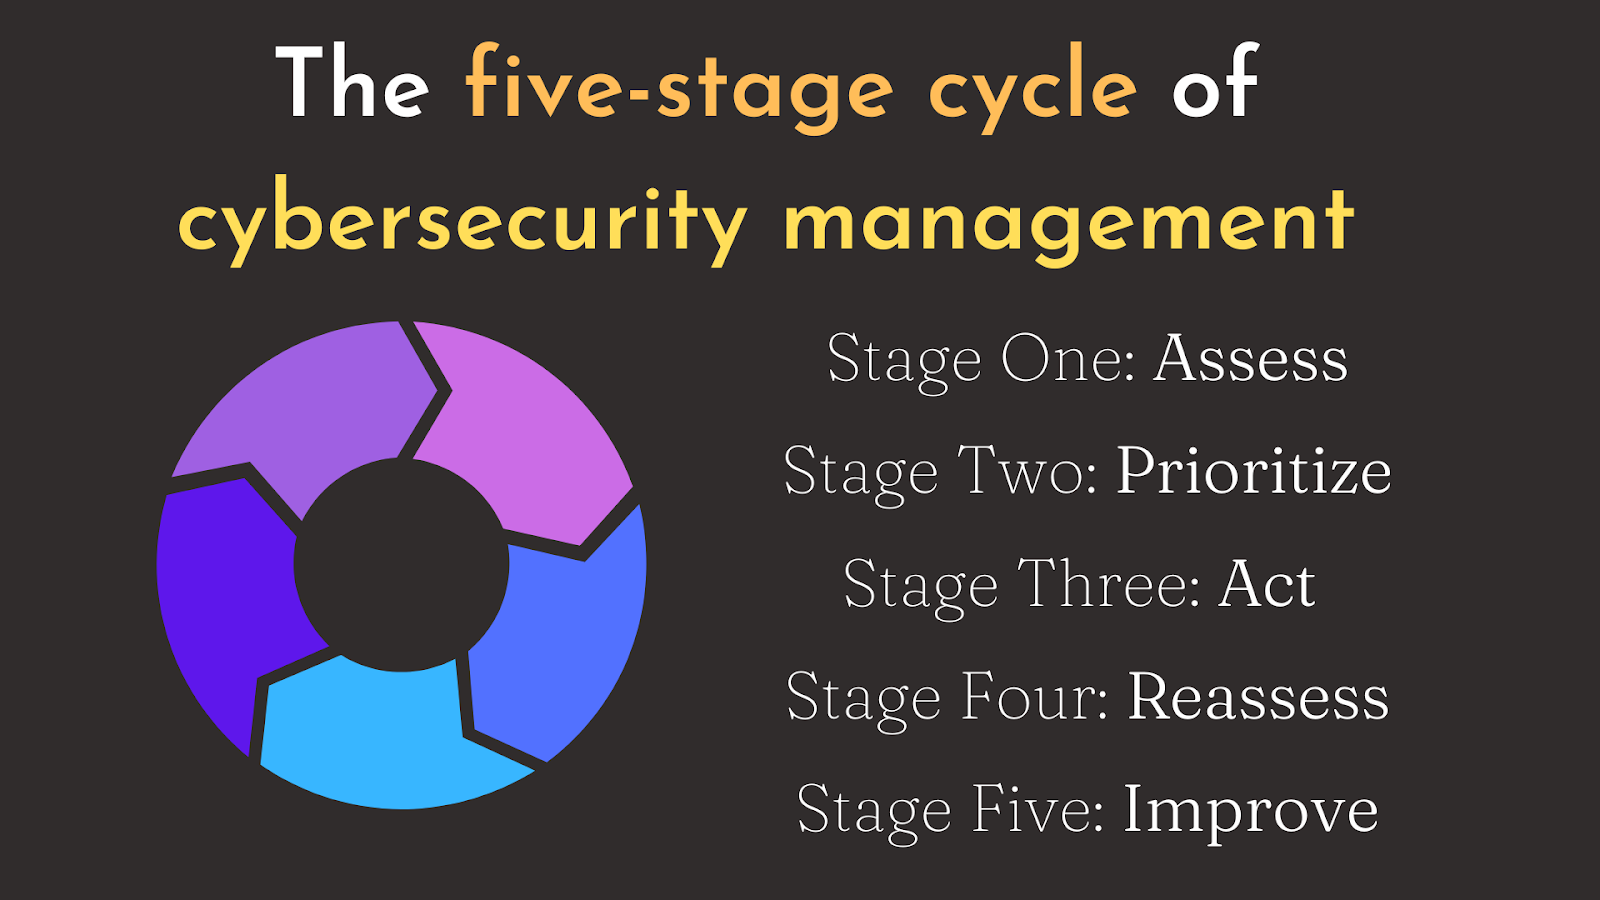 Image showing list of 5 stages of cybersecurity management